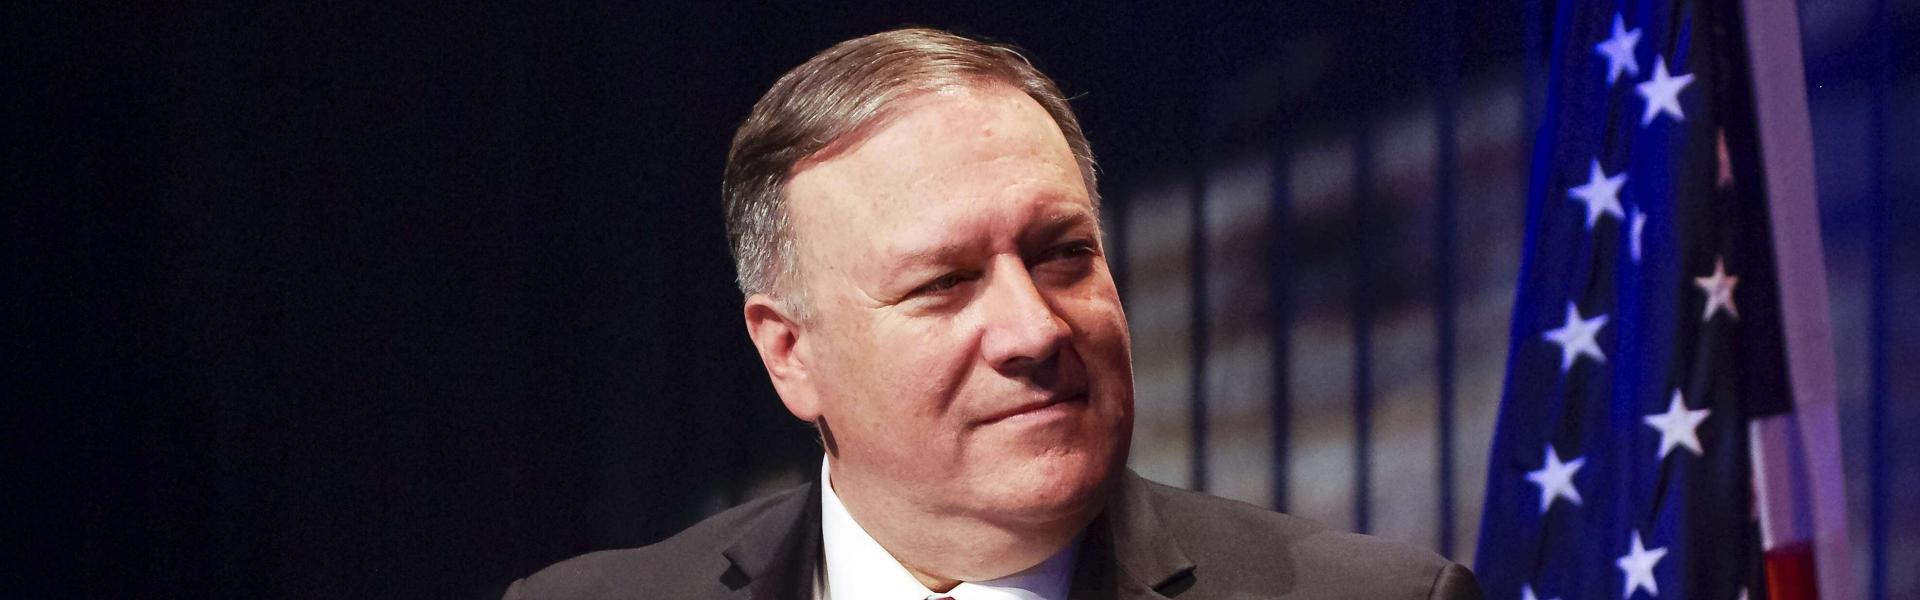 There will be a price for a Turkish attack on Kurds, says Pompeo 1